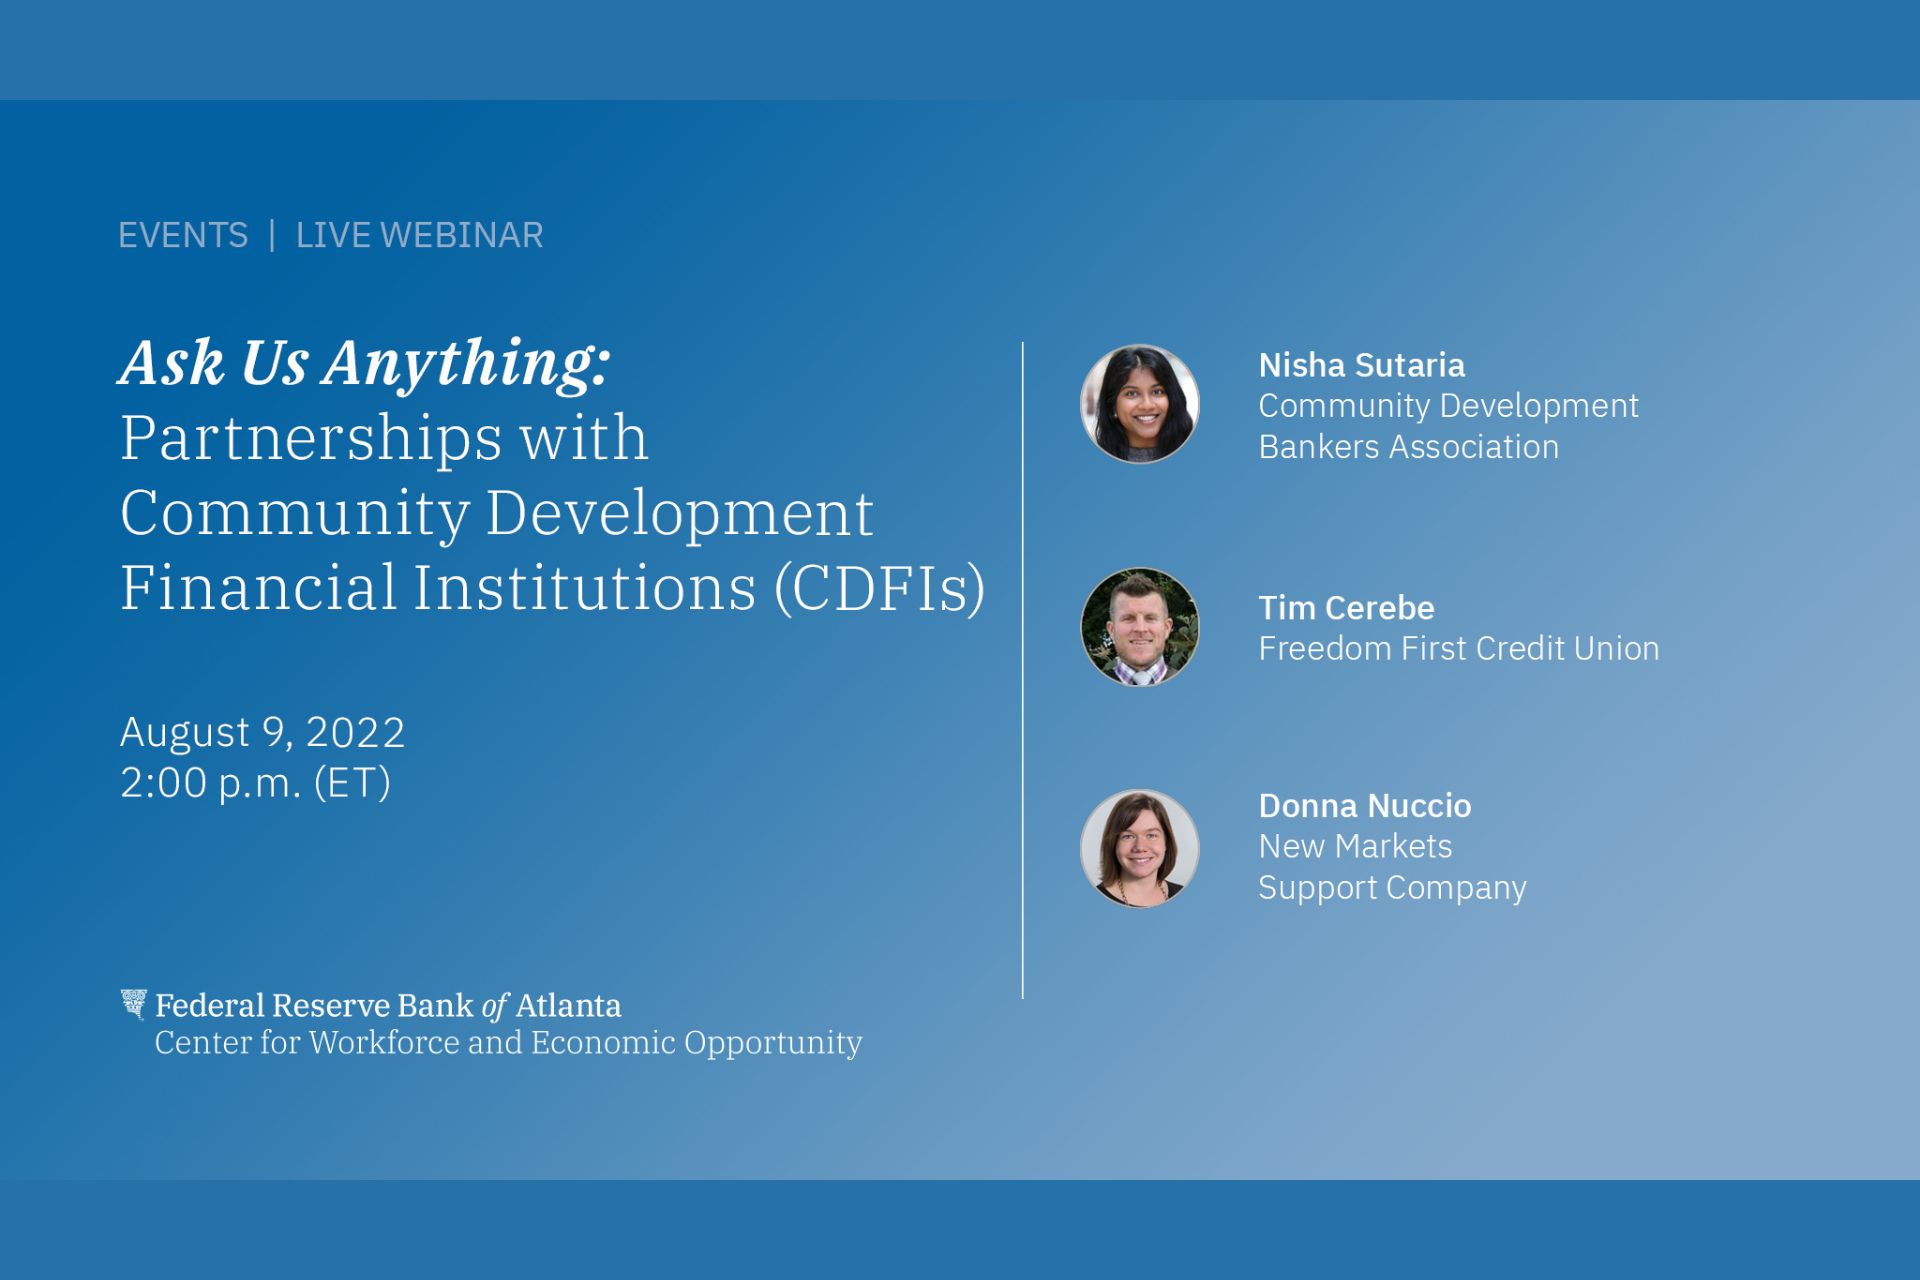 Ask Us Anything: Partnerships with Community Development Financial Institutions (CDFIs)